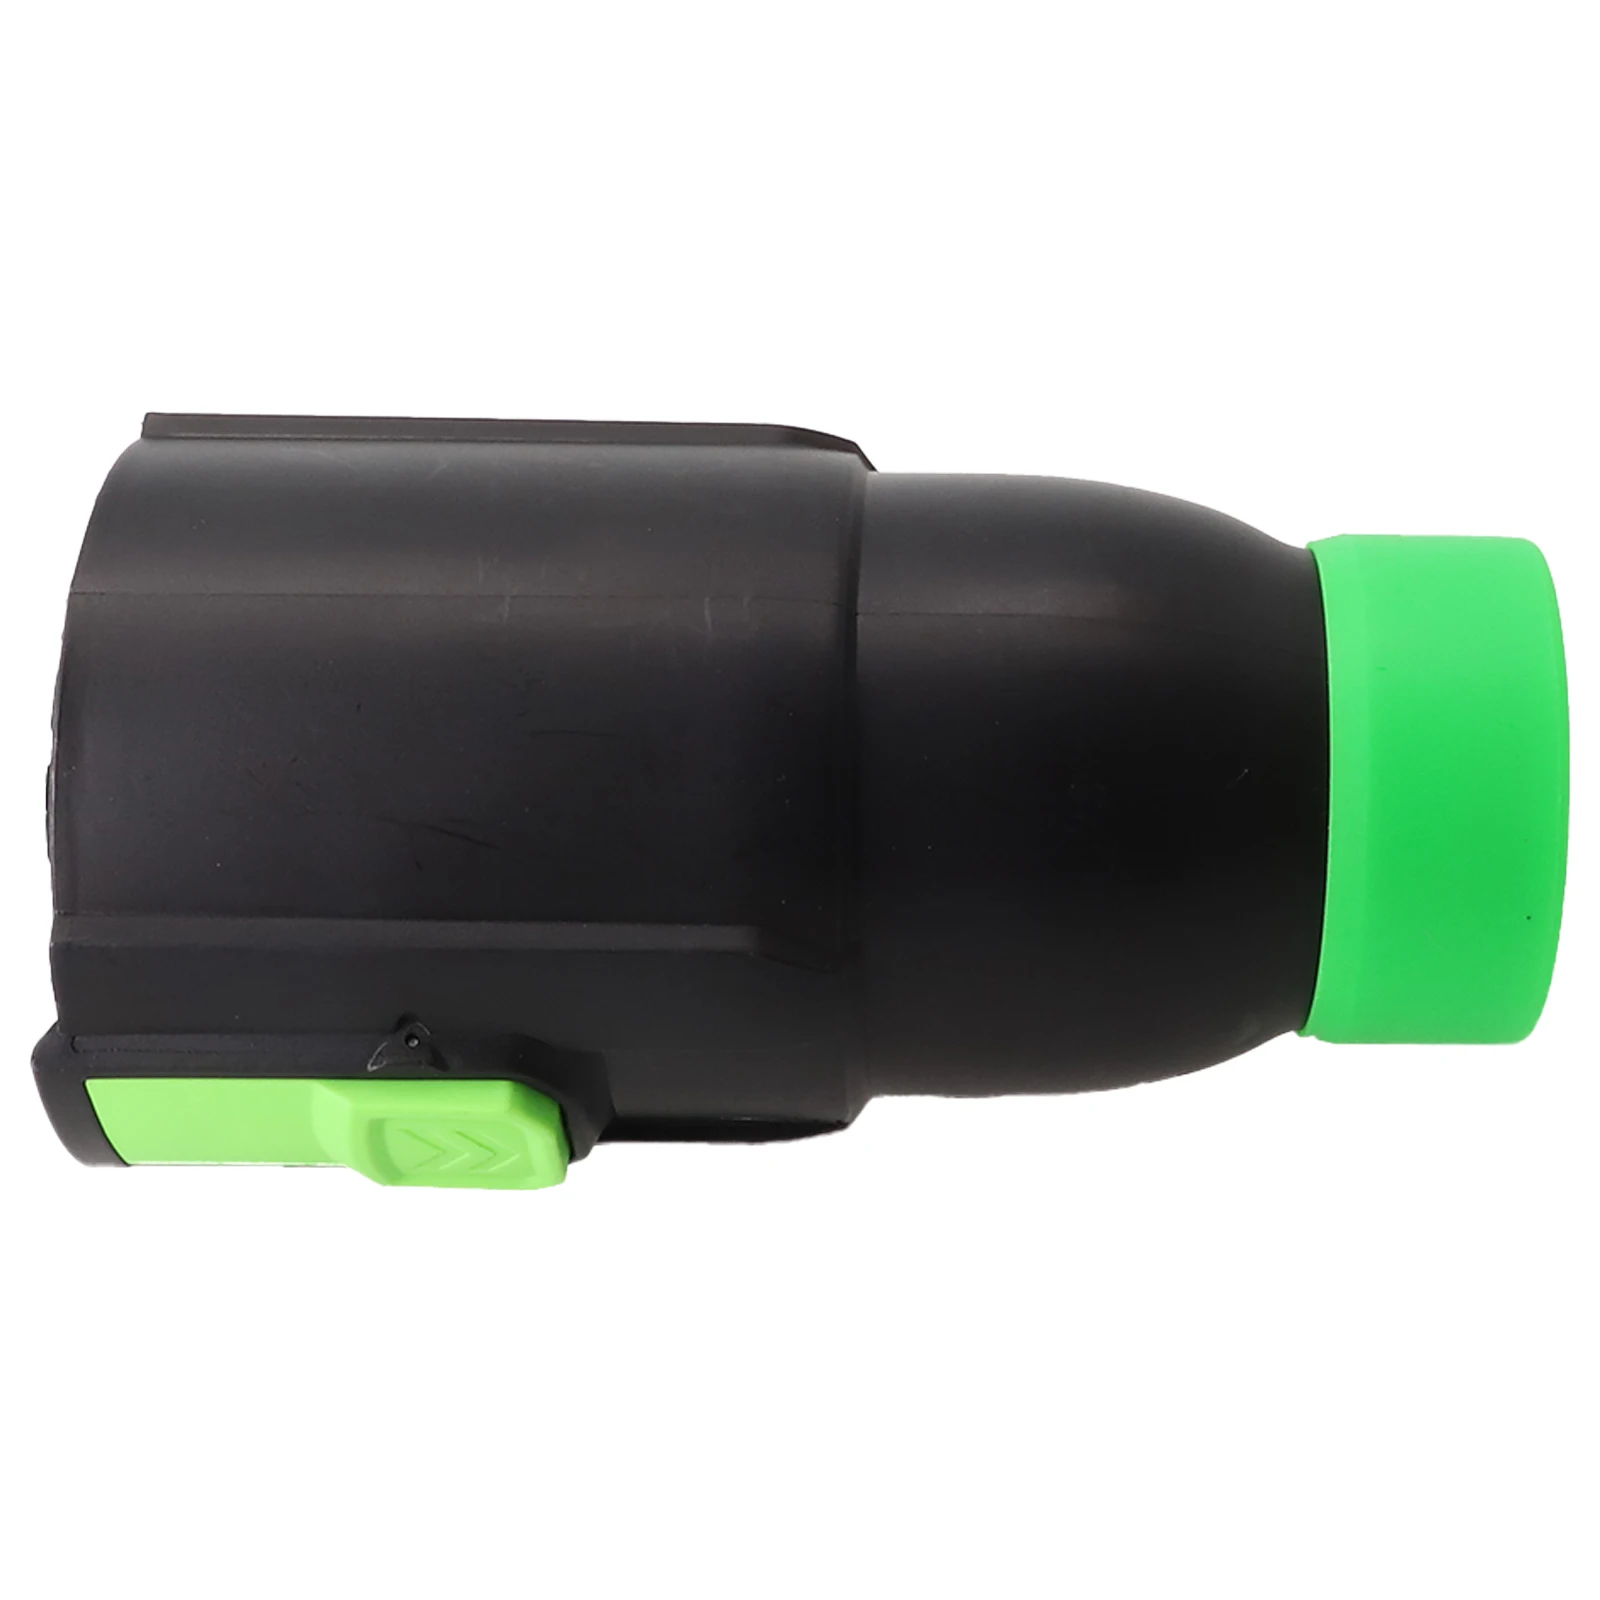 

Car Drying Nozzle For EGO Leaf Blower Nozzle Work For EGO 530 575 580 615 650 Garden Power Tools Replacement Accessories